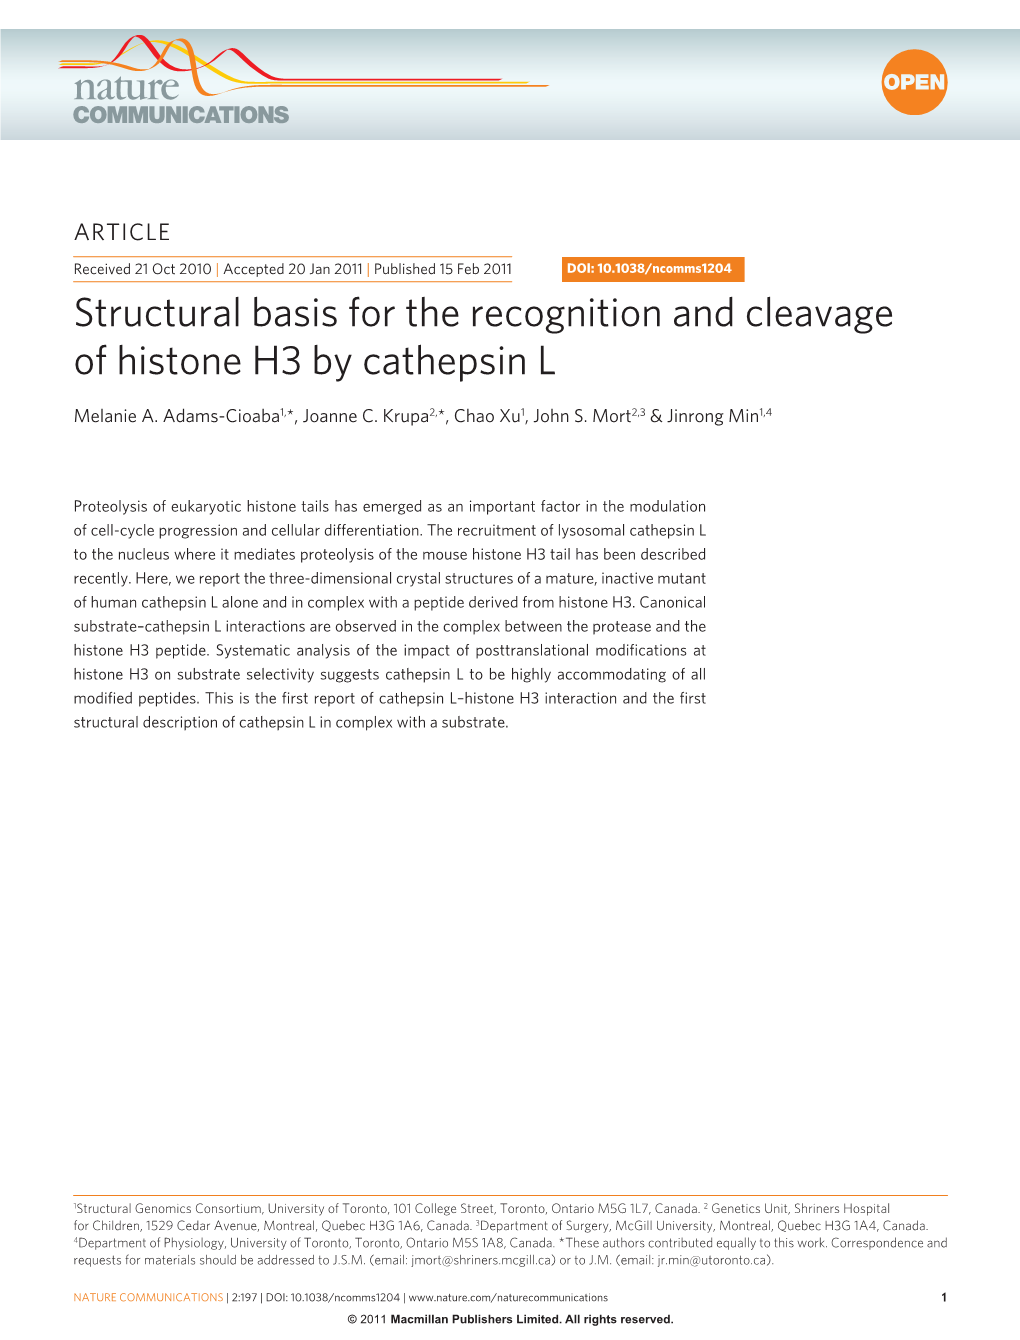 Structural Basis for the Recognition and Cleavage of Histone H3 by Cathepsin L